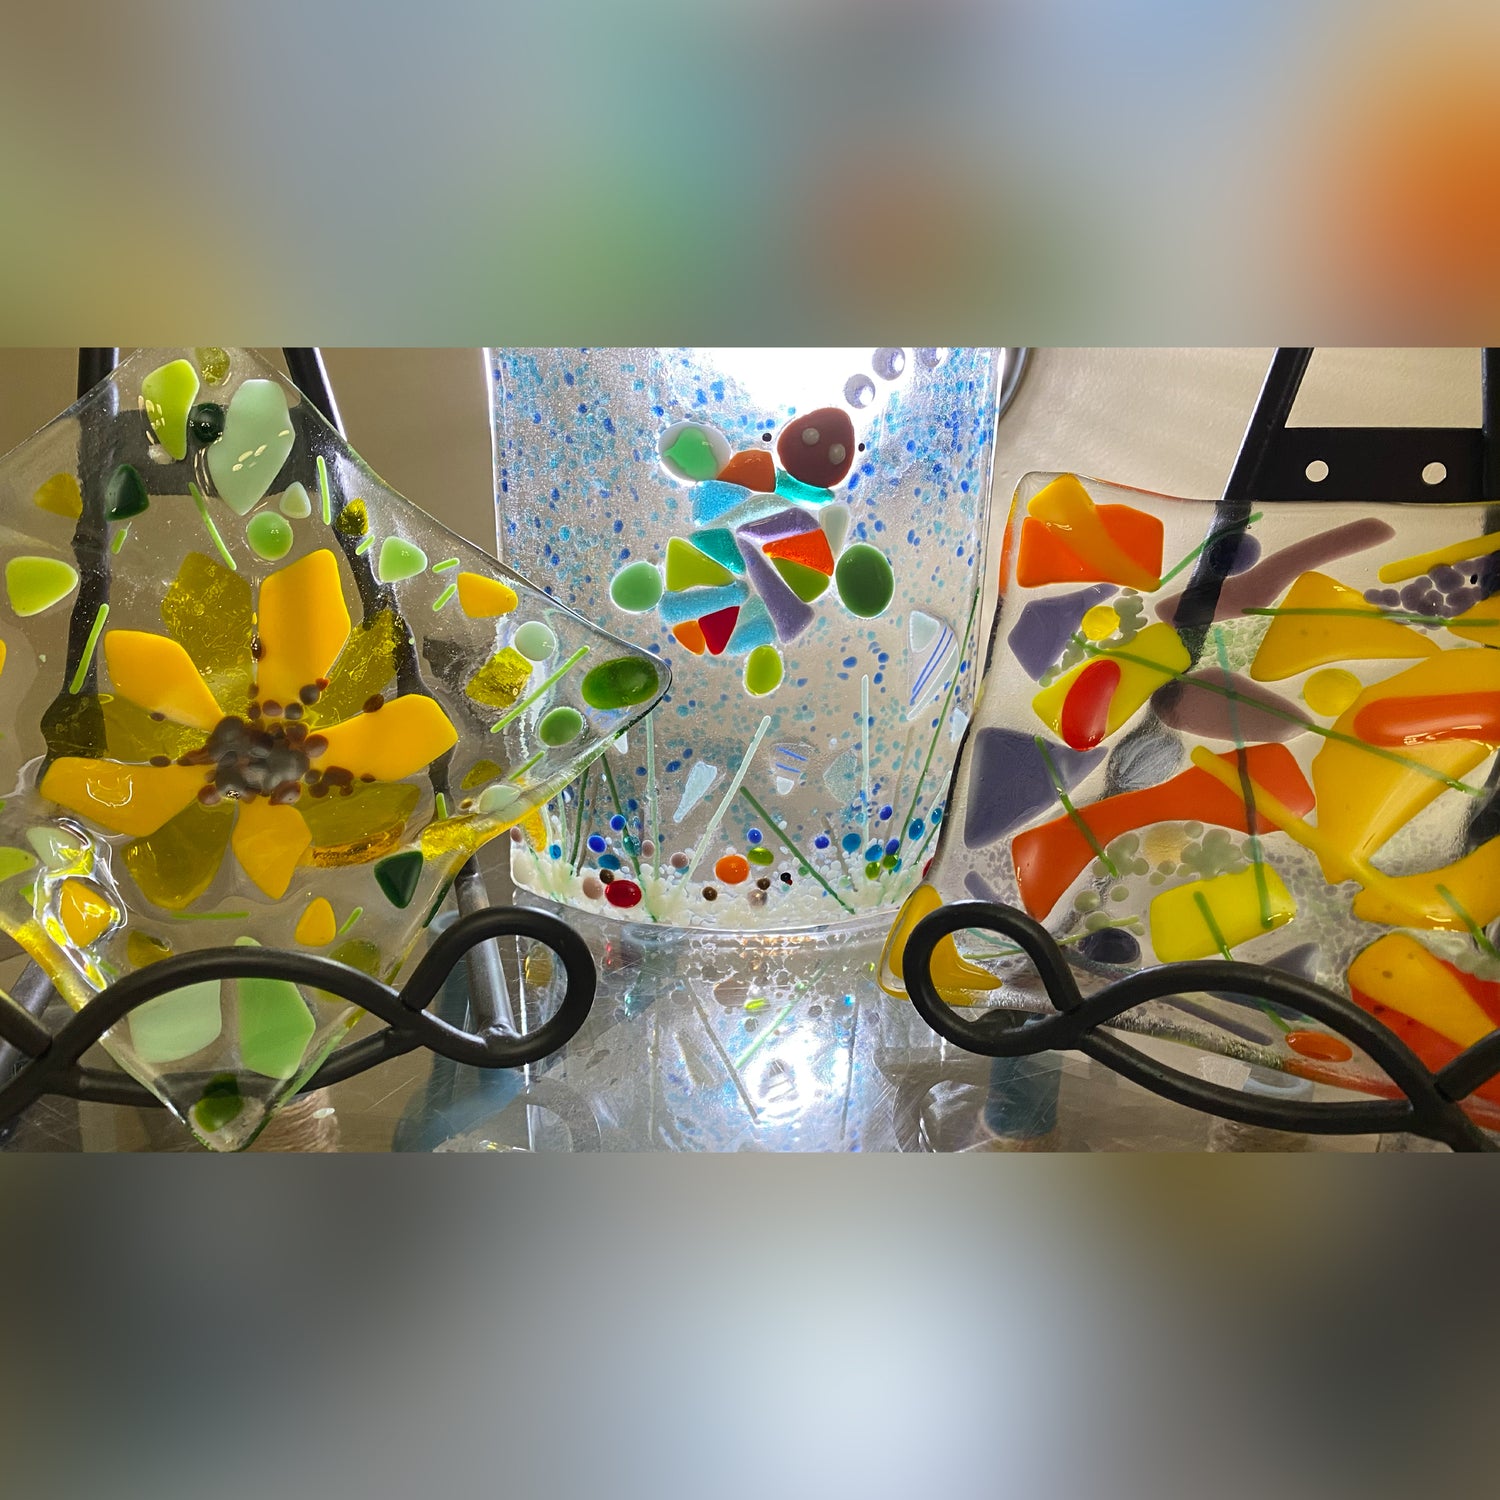 Fused Glass & Tea Experience - Wednesday, March 13th - 6:00 p.m.